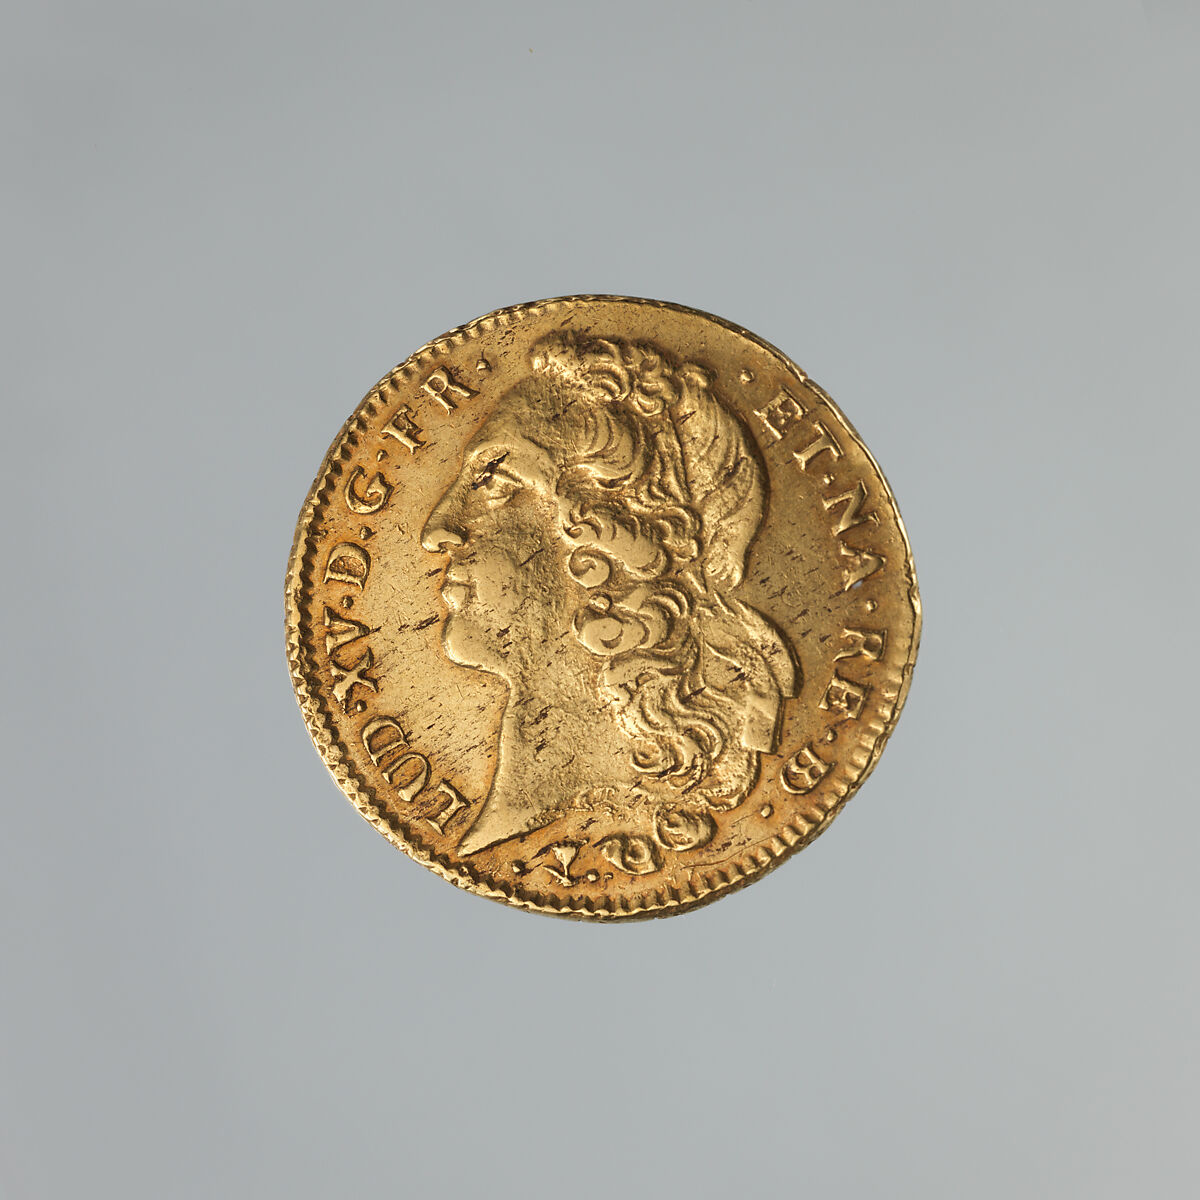 Double Louis d’or of Louis XV of France (b. 1710; r. 1715–74), Joseph-Charles Roettiers (French, Paris 1691–1779 Paris), Gold, French 